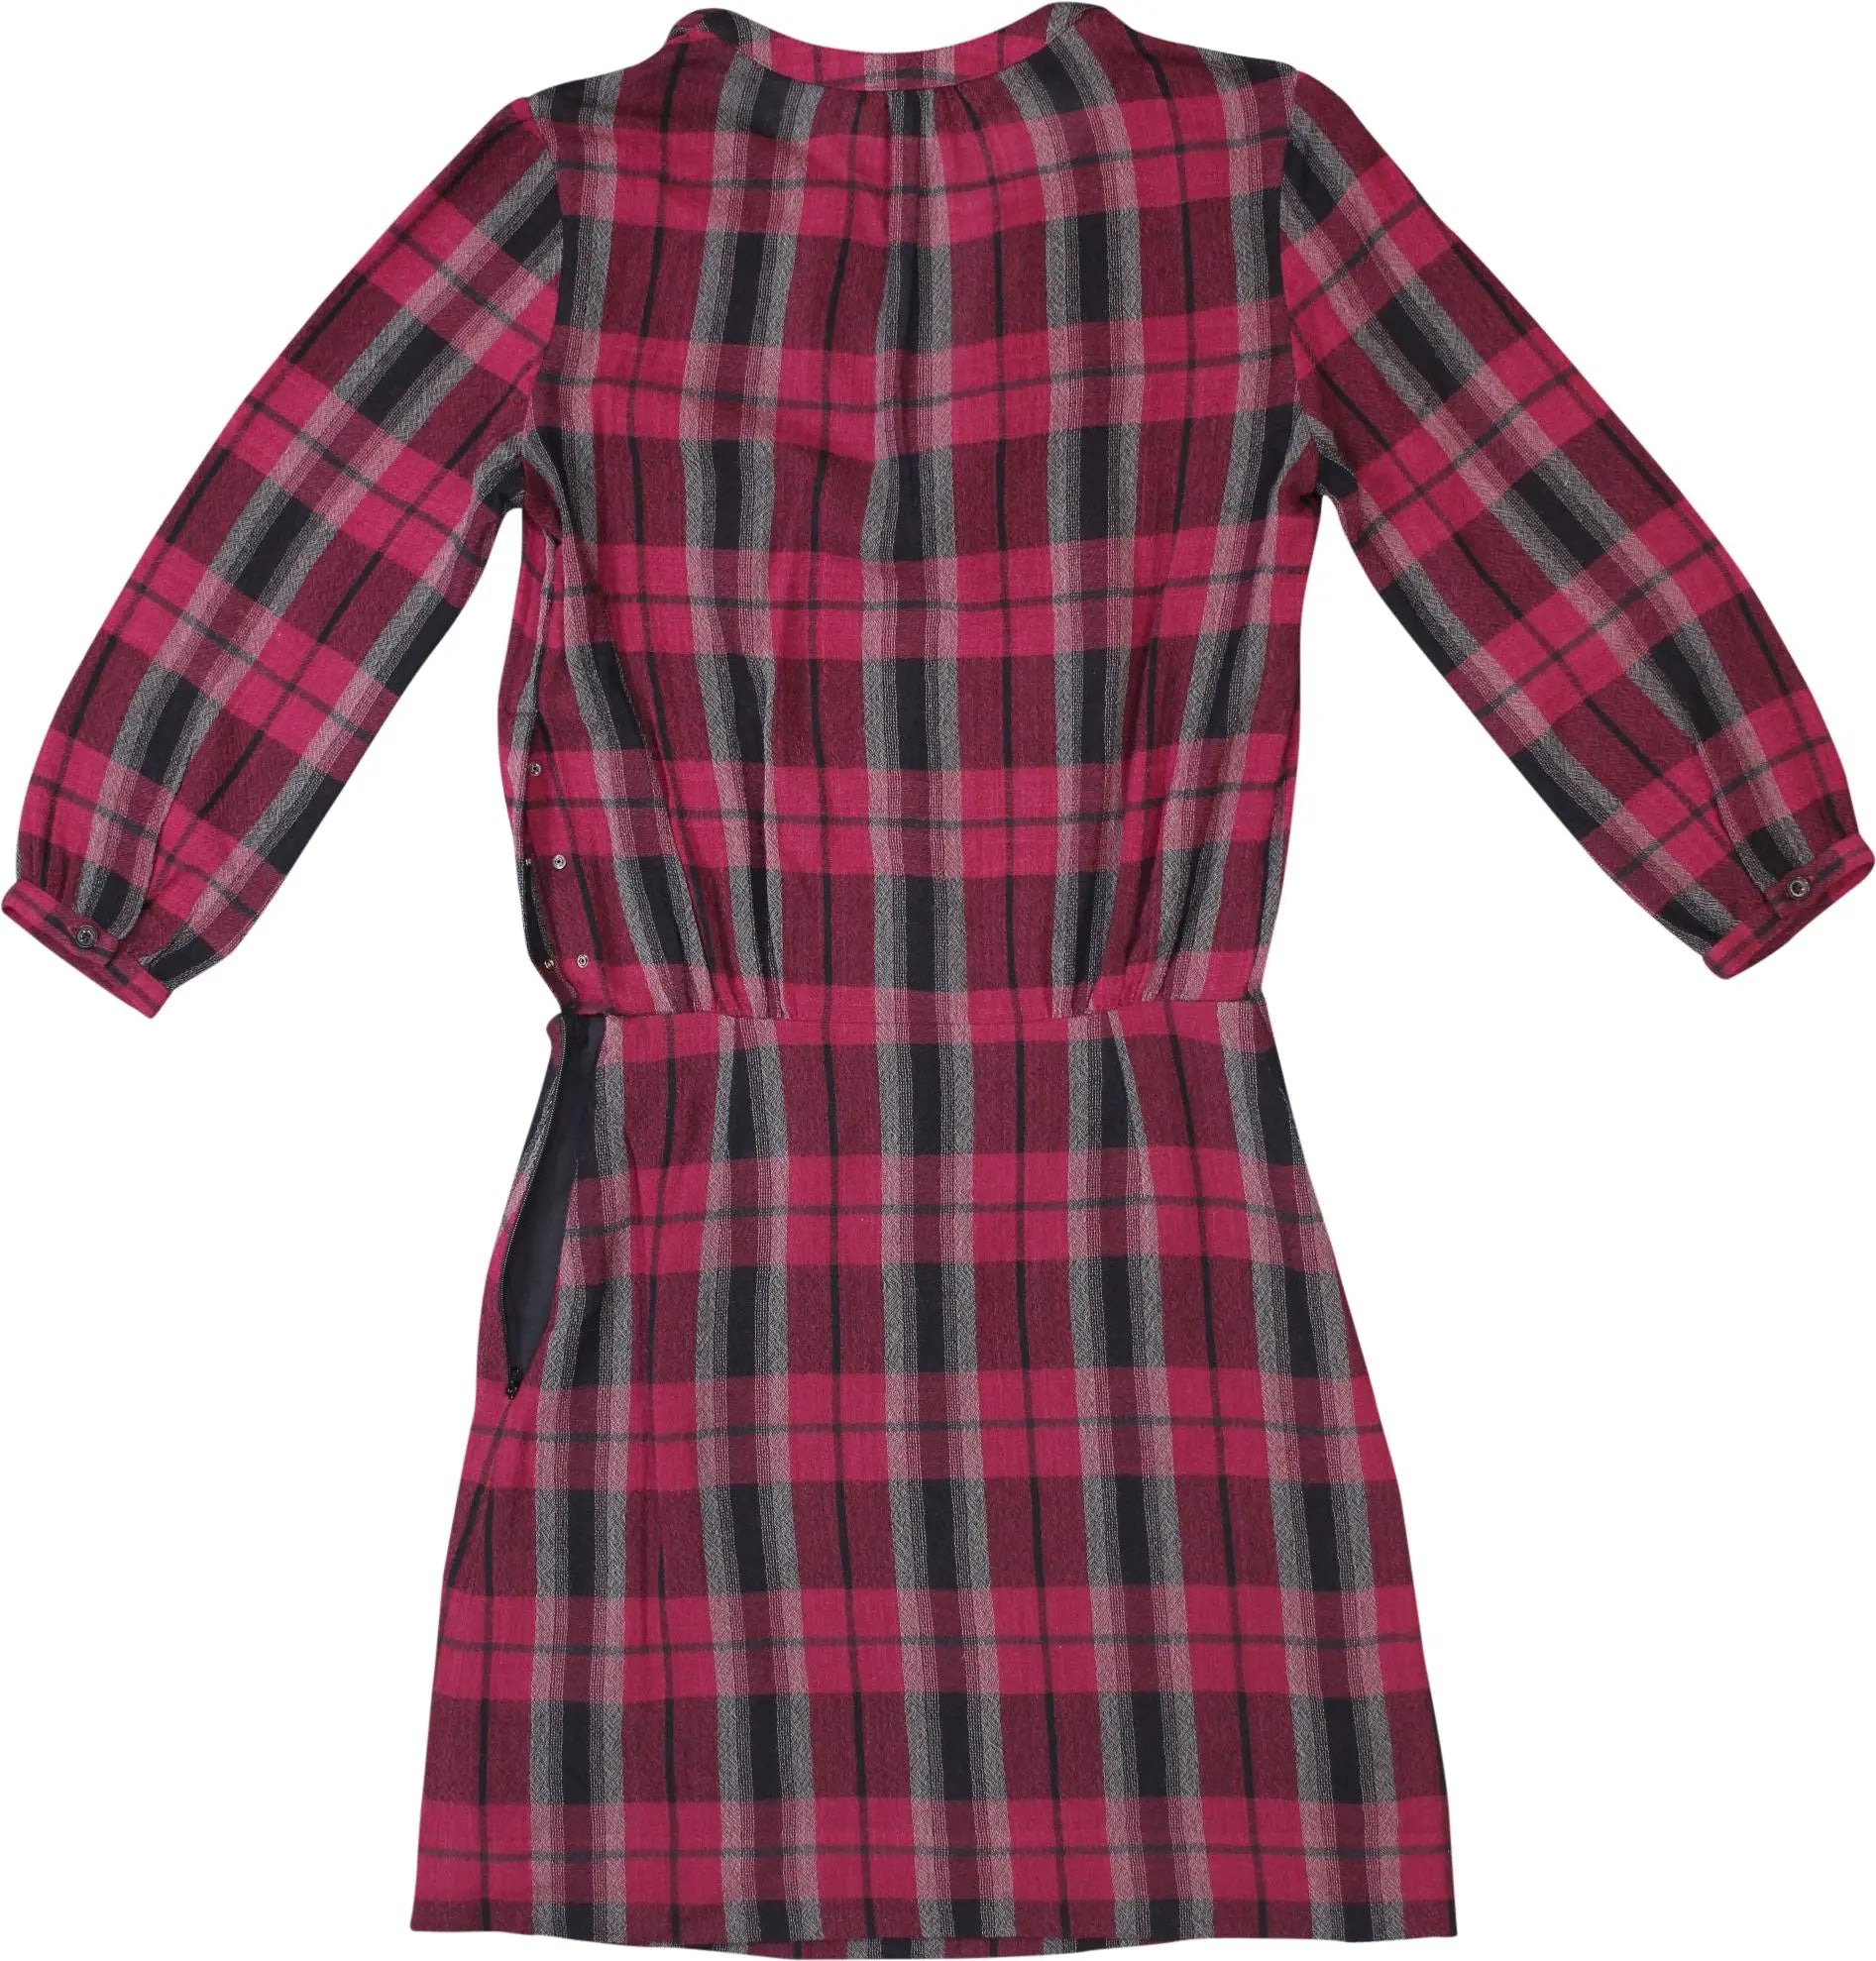 Burberry - Plaid Dress by Burberry Brit- ThriftTale.com - Vintage and second handclothing